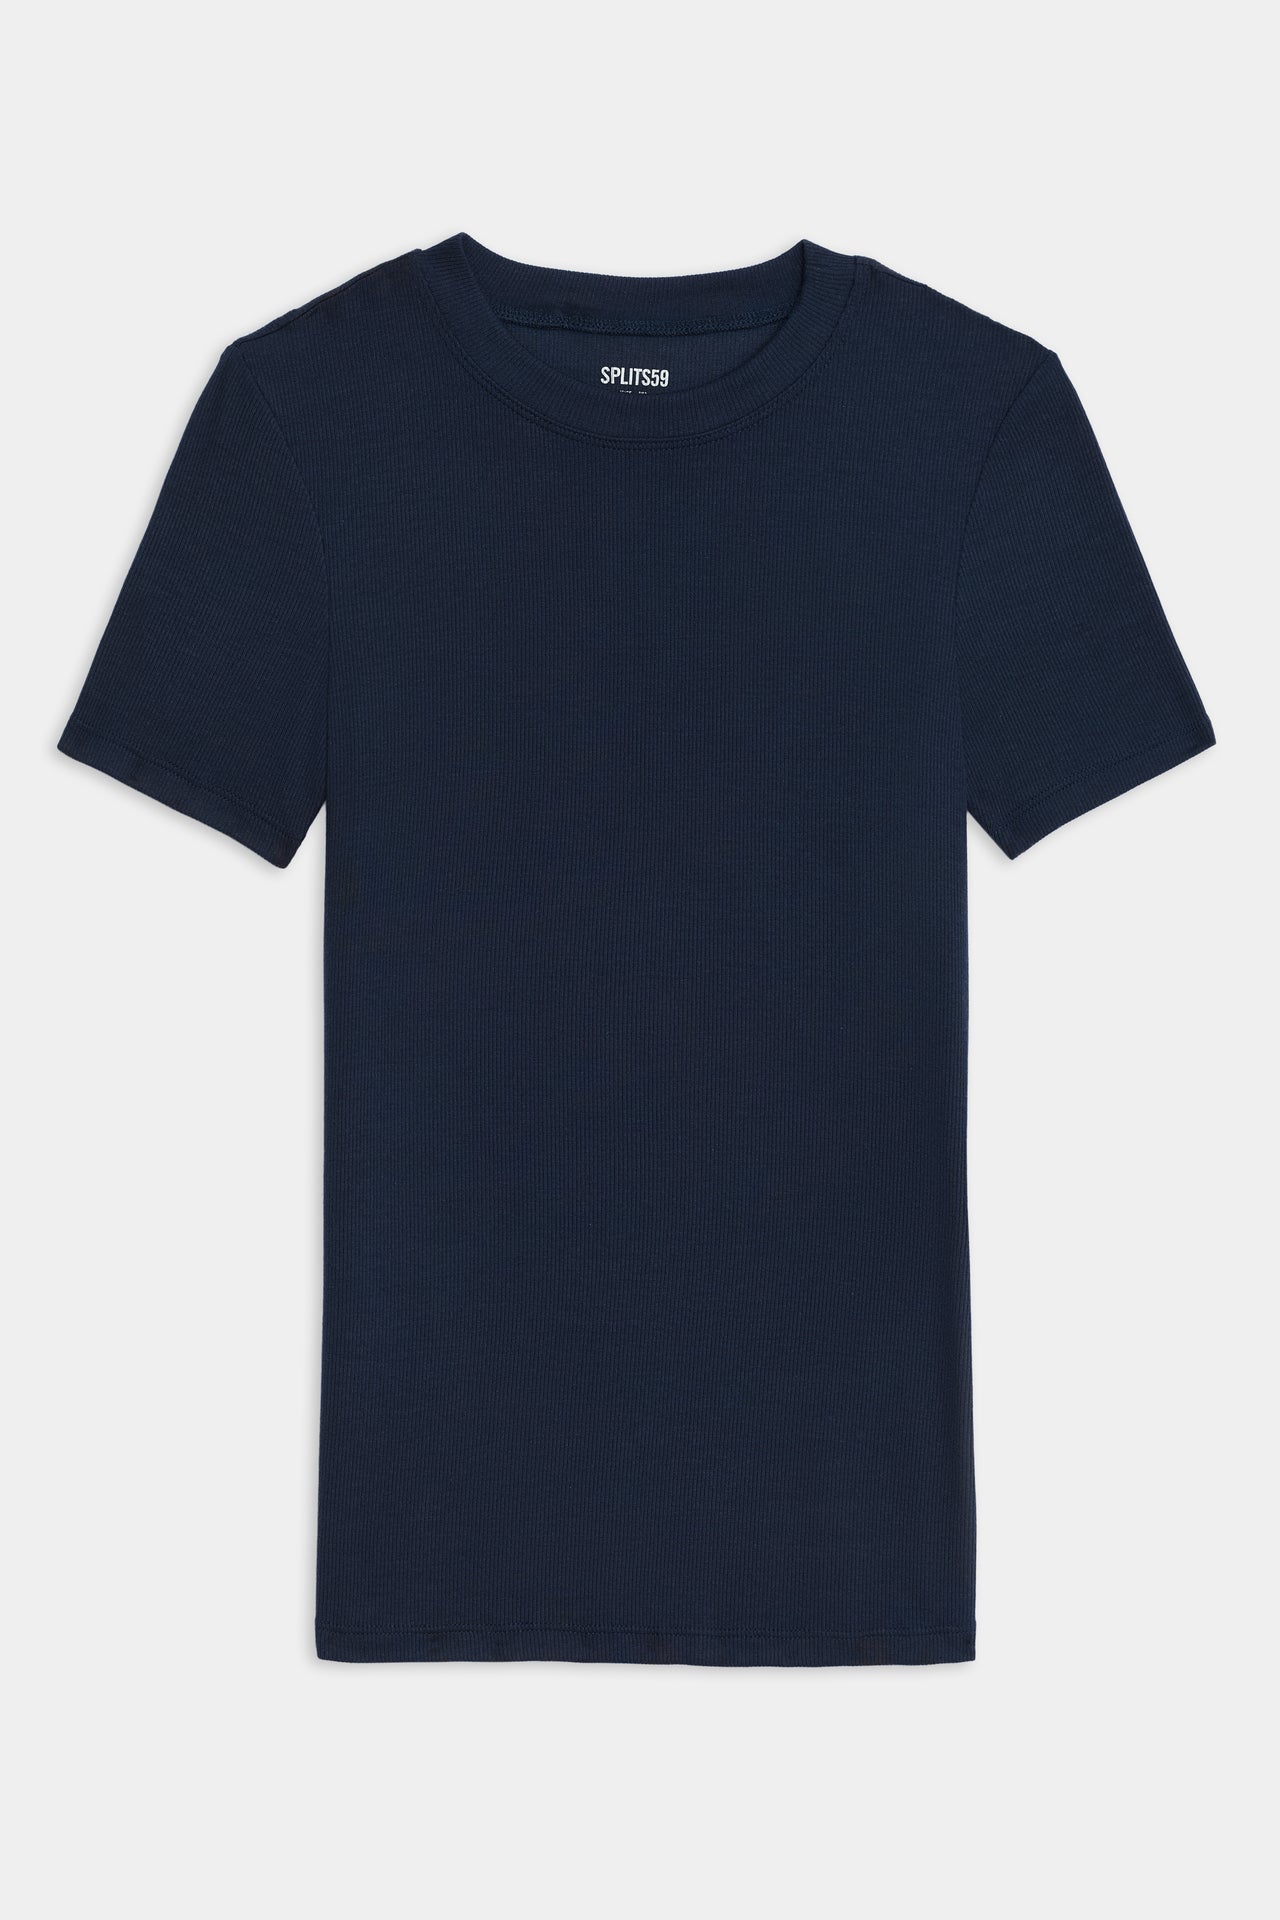 A Louise Rib Short Sleeve - Indigo t-shirt from SPLITS59 with a white logo on the front, perfect for yoga.